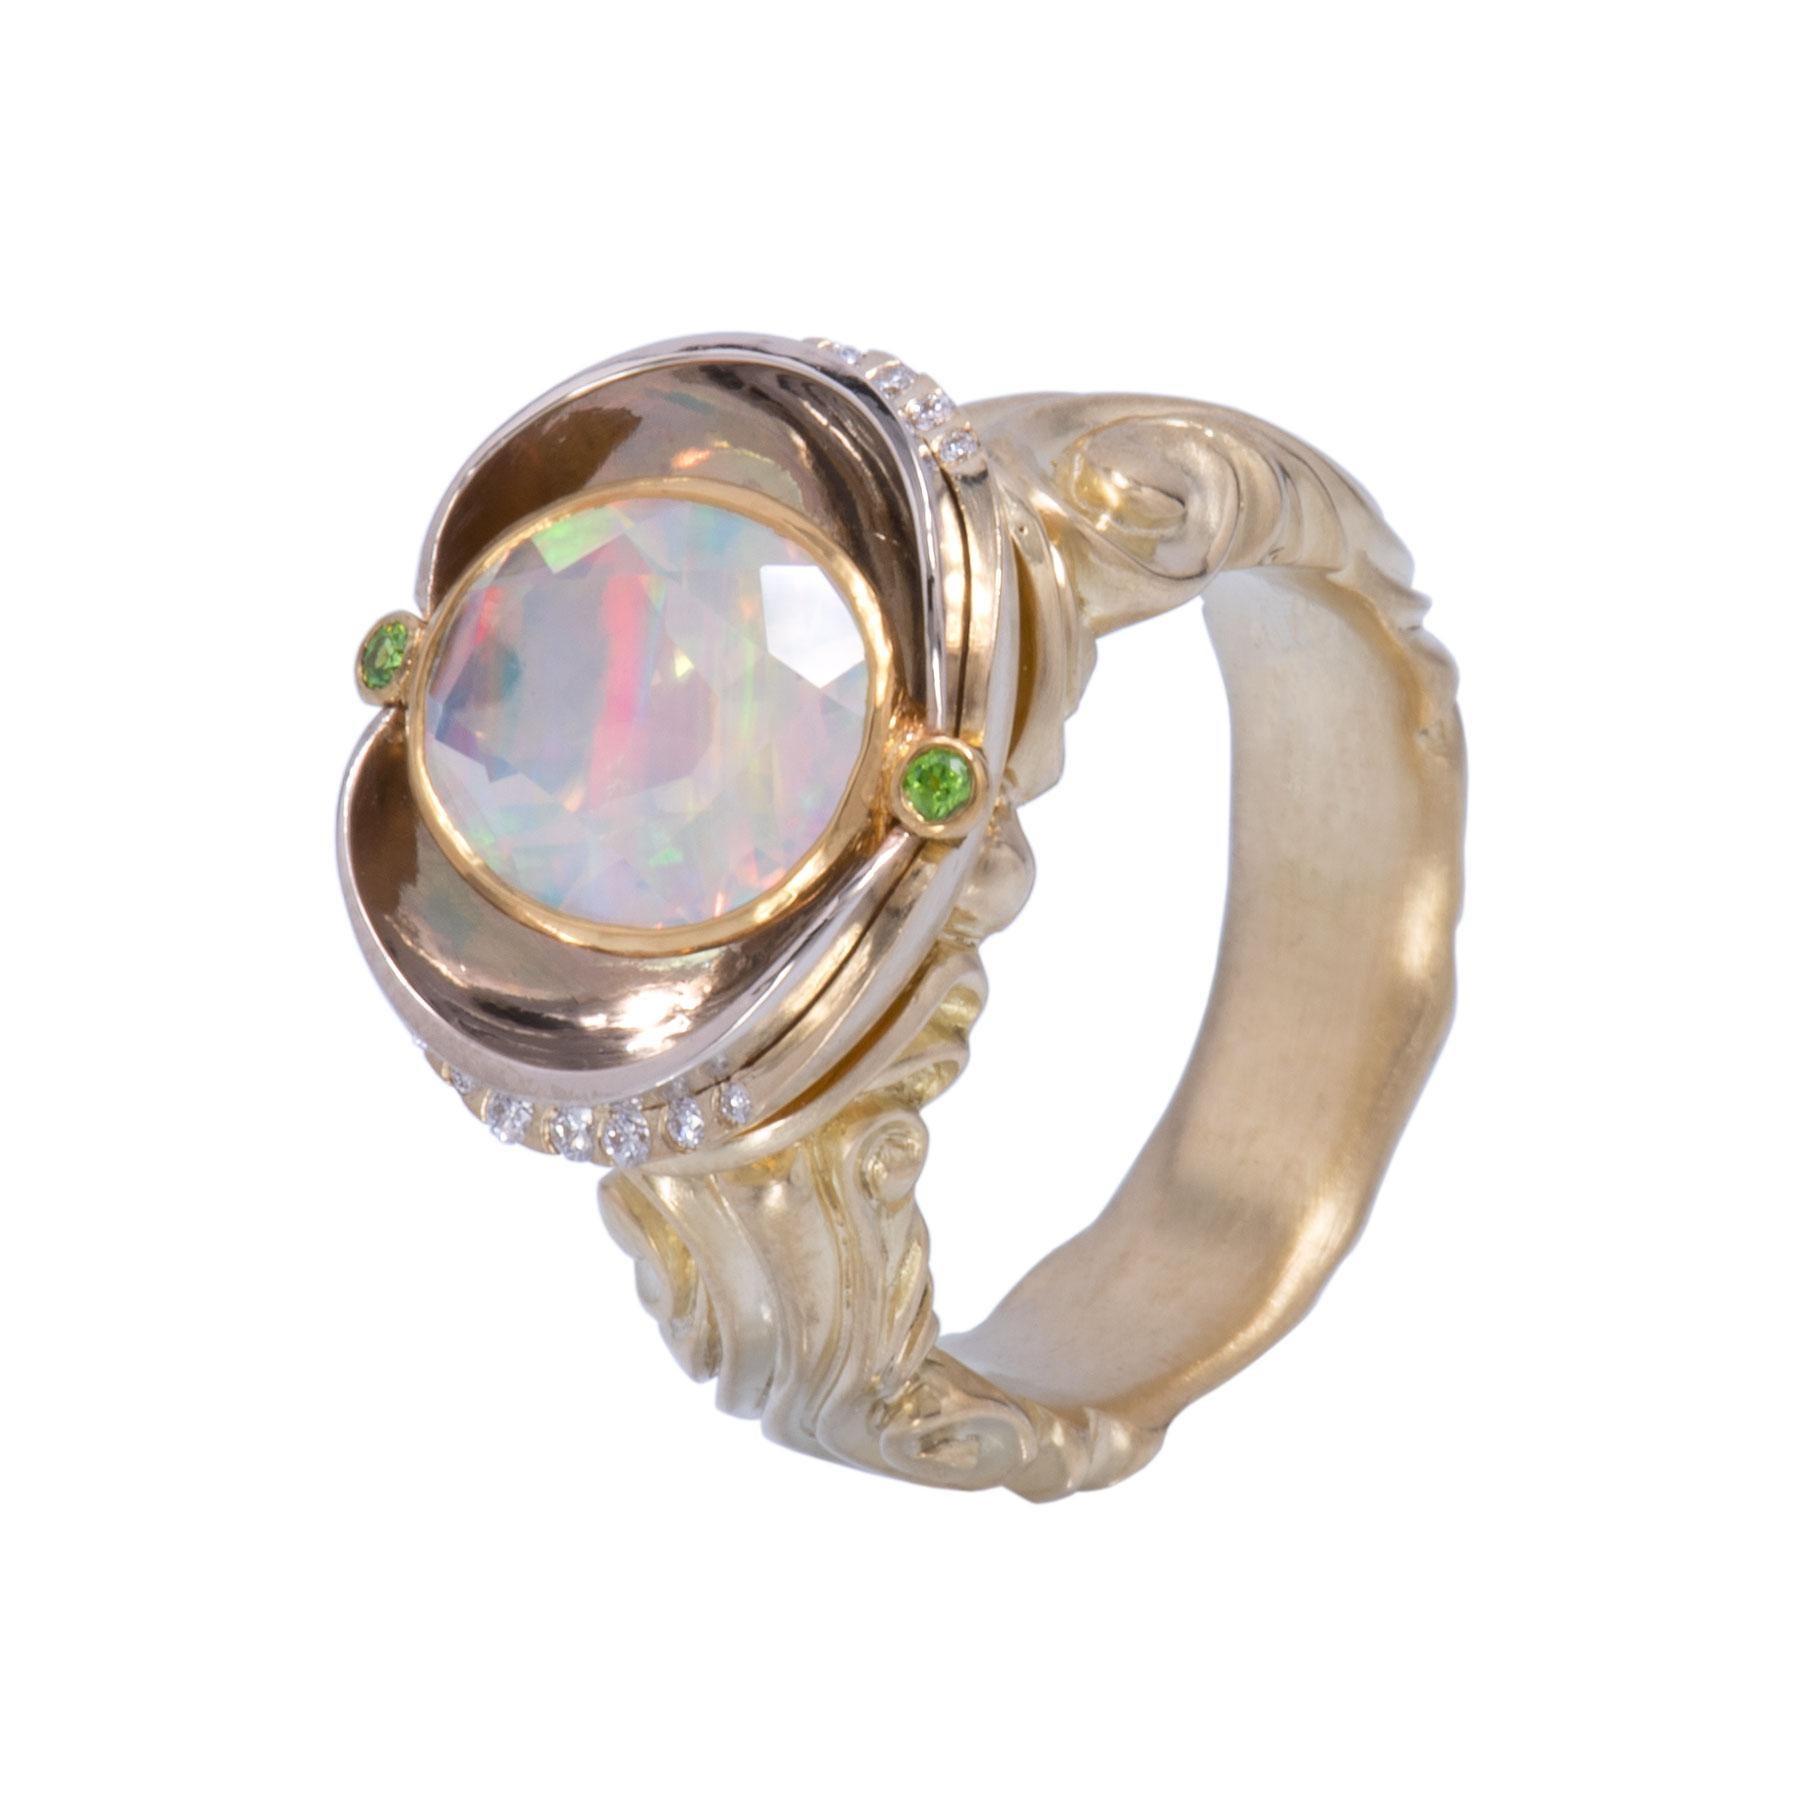 A Brazilian Opal 2.63cts is open set in 18 karat gold and mounted within an oval bowl of 18 karat white gold. Cross set ovals create a reflecting bowl that mirror the stone above. At the ends of the Brazilian Opal, 2 demantoid garnets .04tcw in